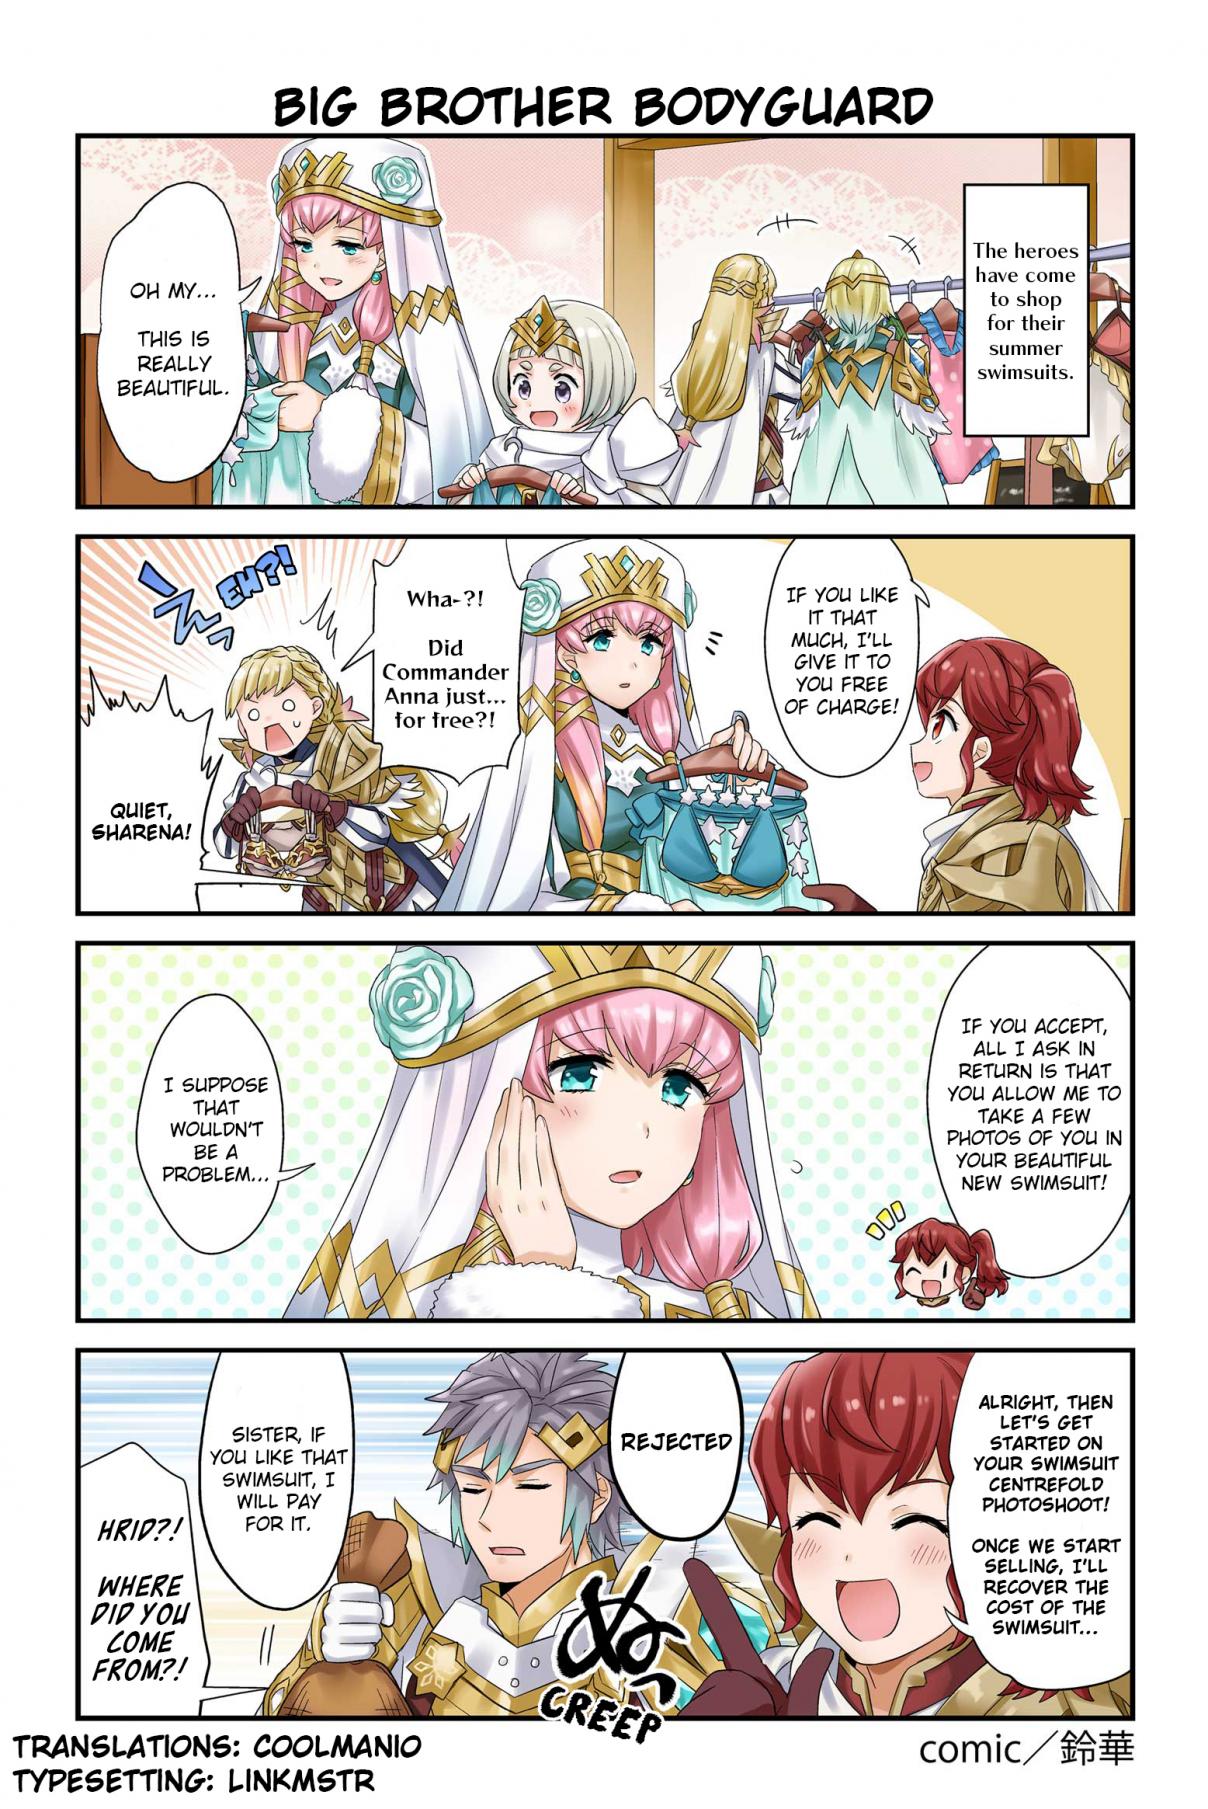 Fire Emblem Heroes: Daily Lives of the Heroes Ch. 98 Big Brother Bodyguard (HQ)